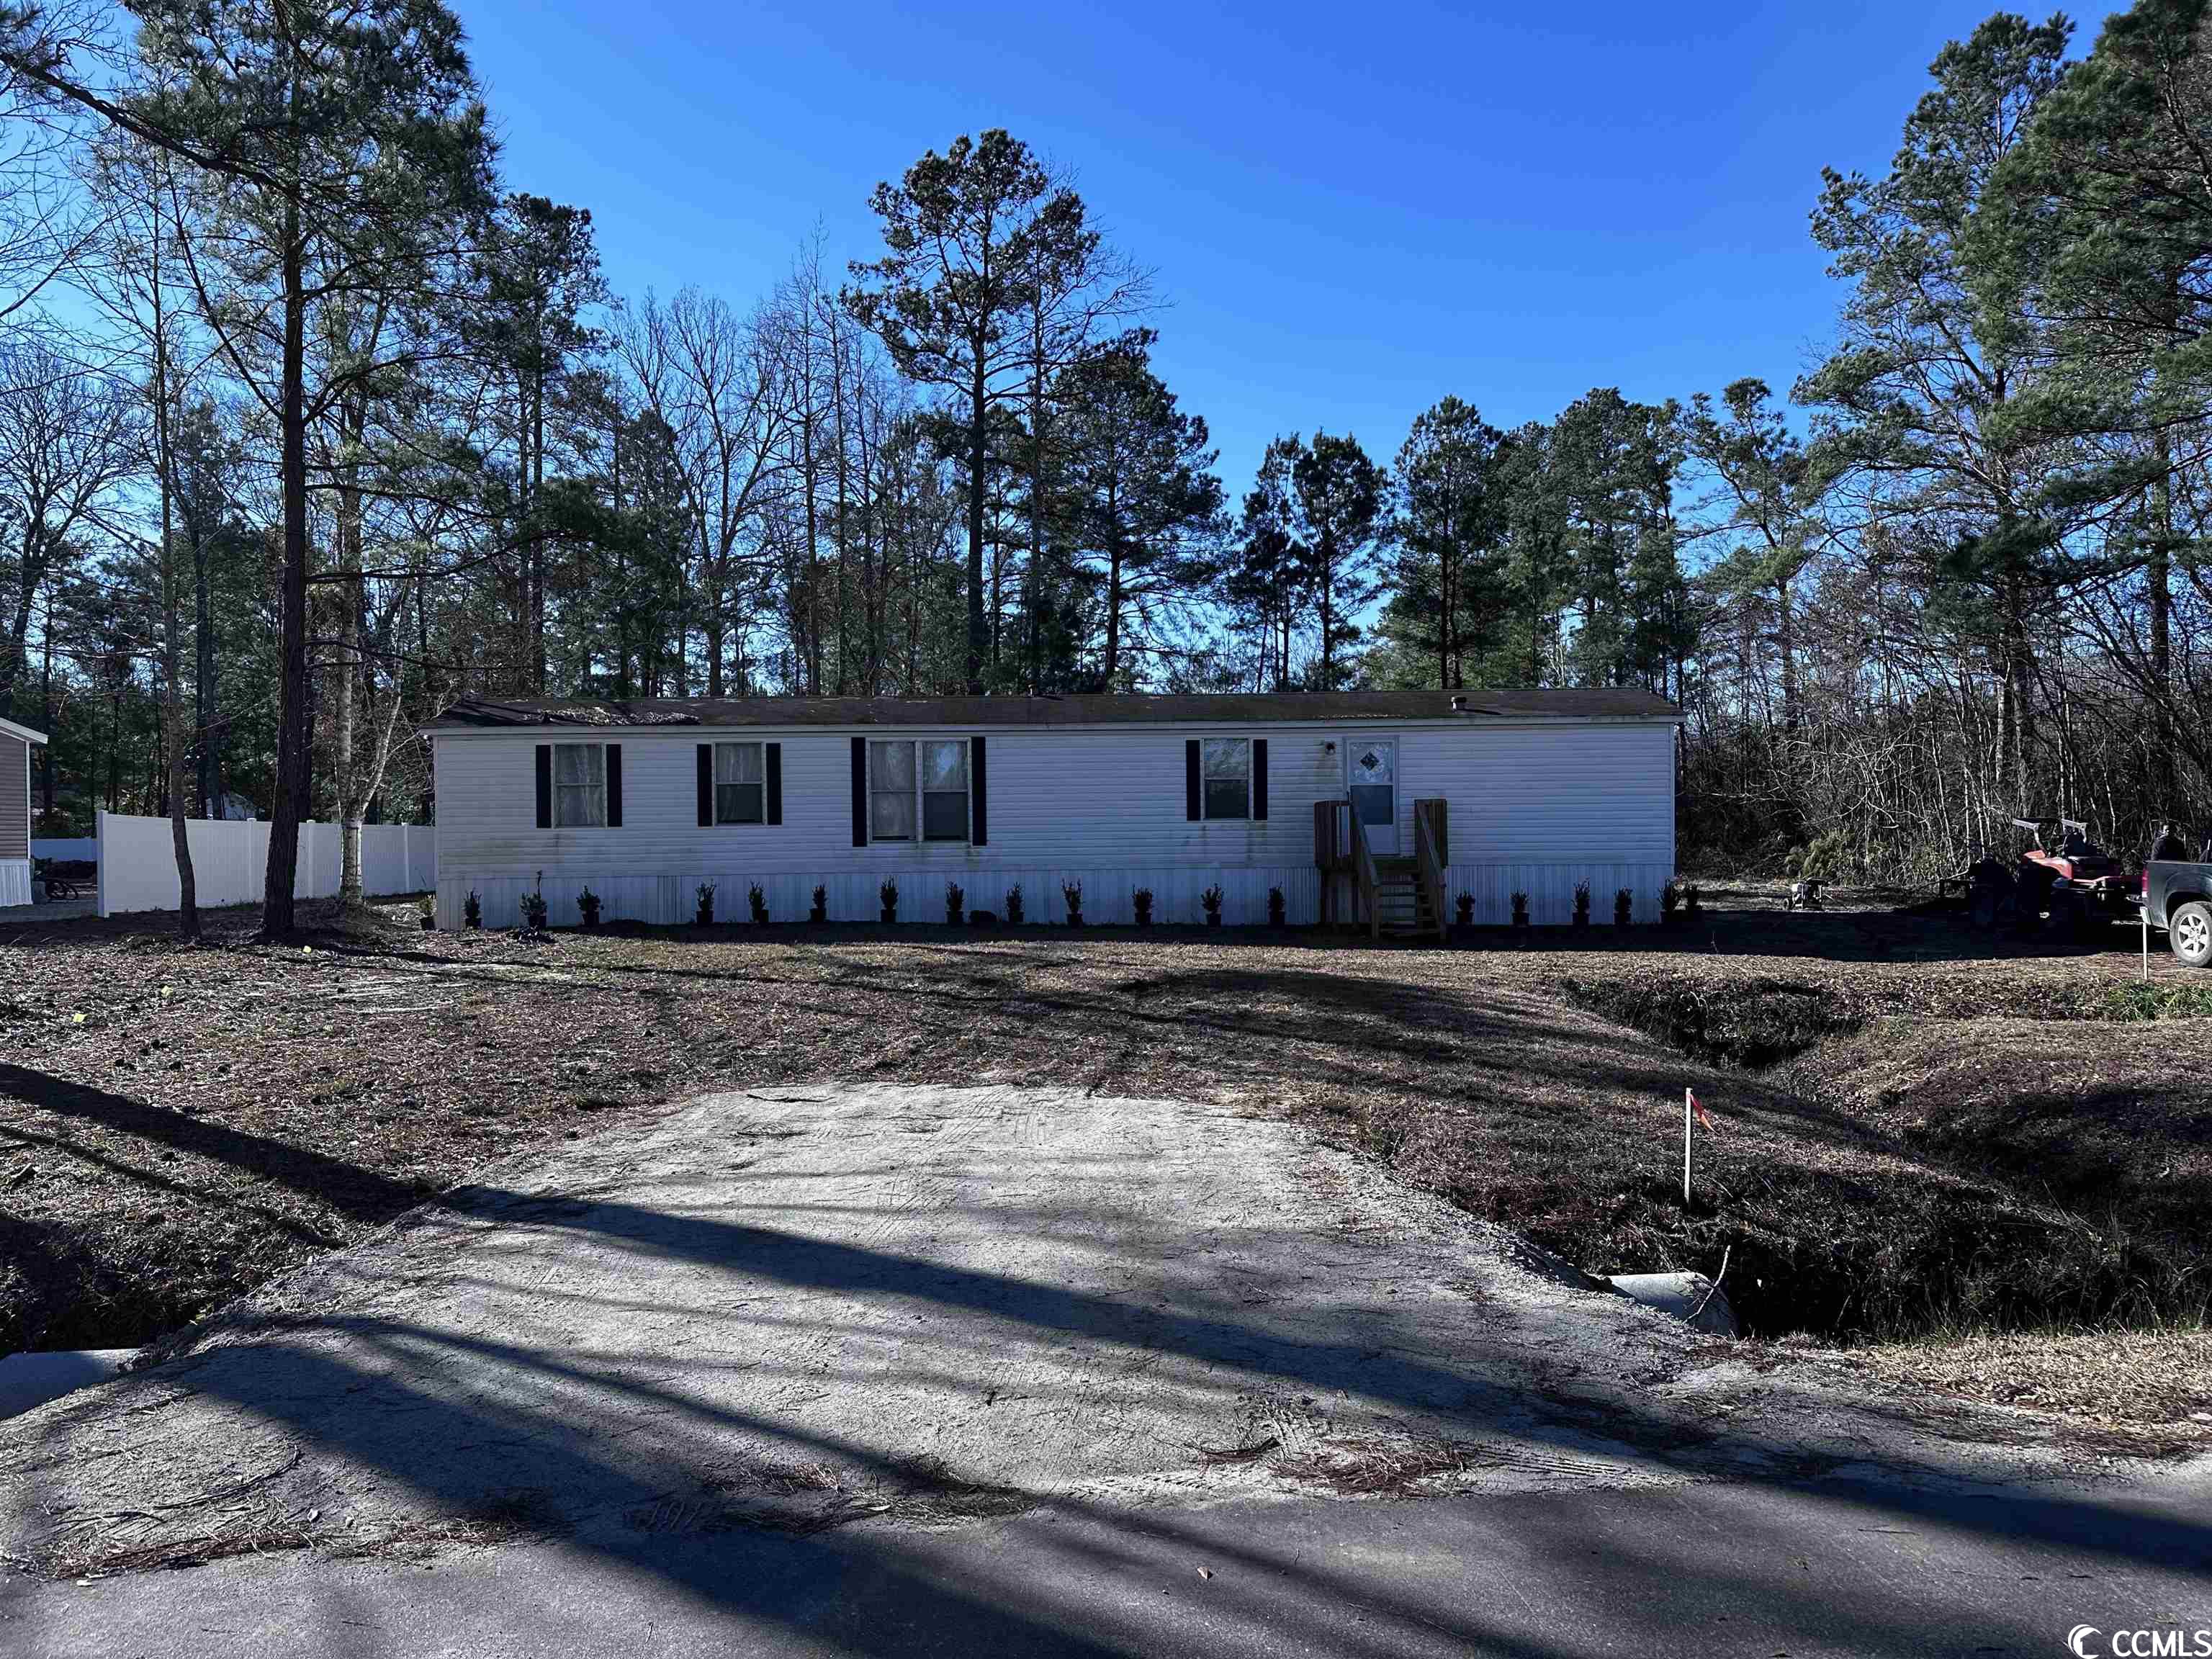 looking for home on a 1/2 acre lot? this is for you. just remodeled home close to historic downtown conway and minutes from the beach. owner is a licensed sc realtor.